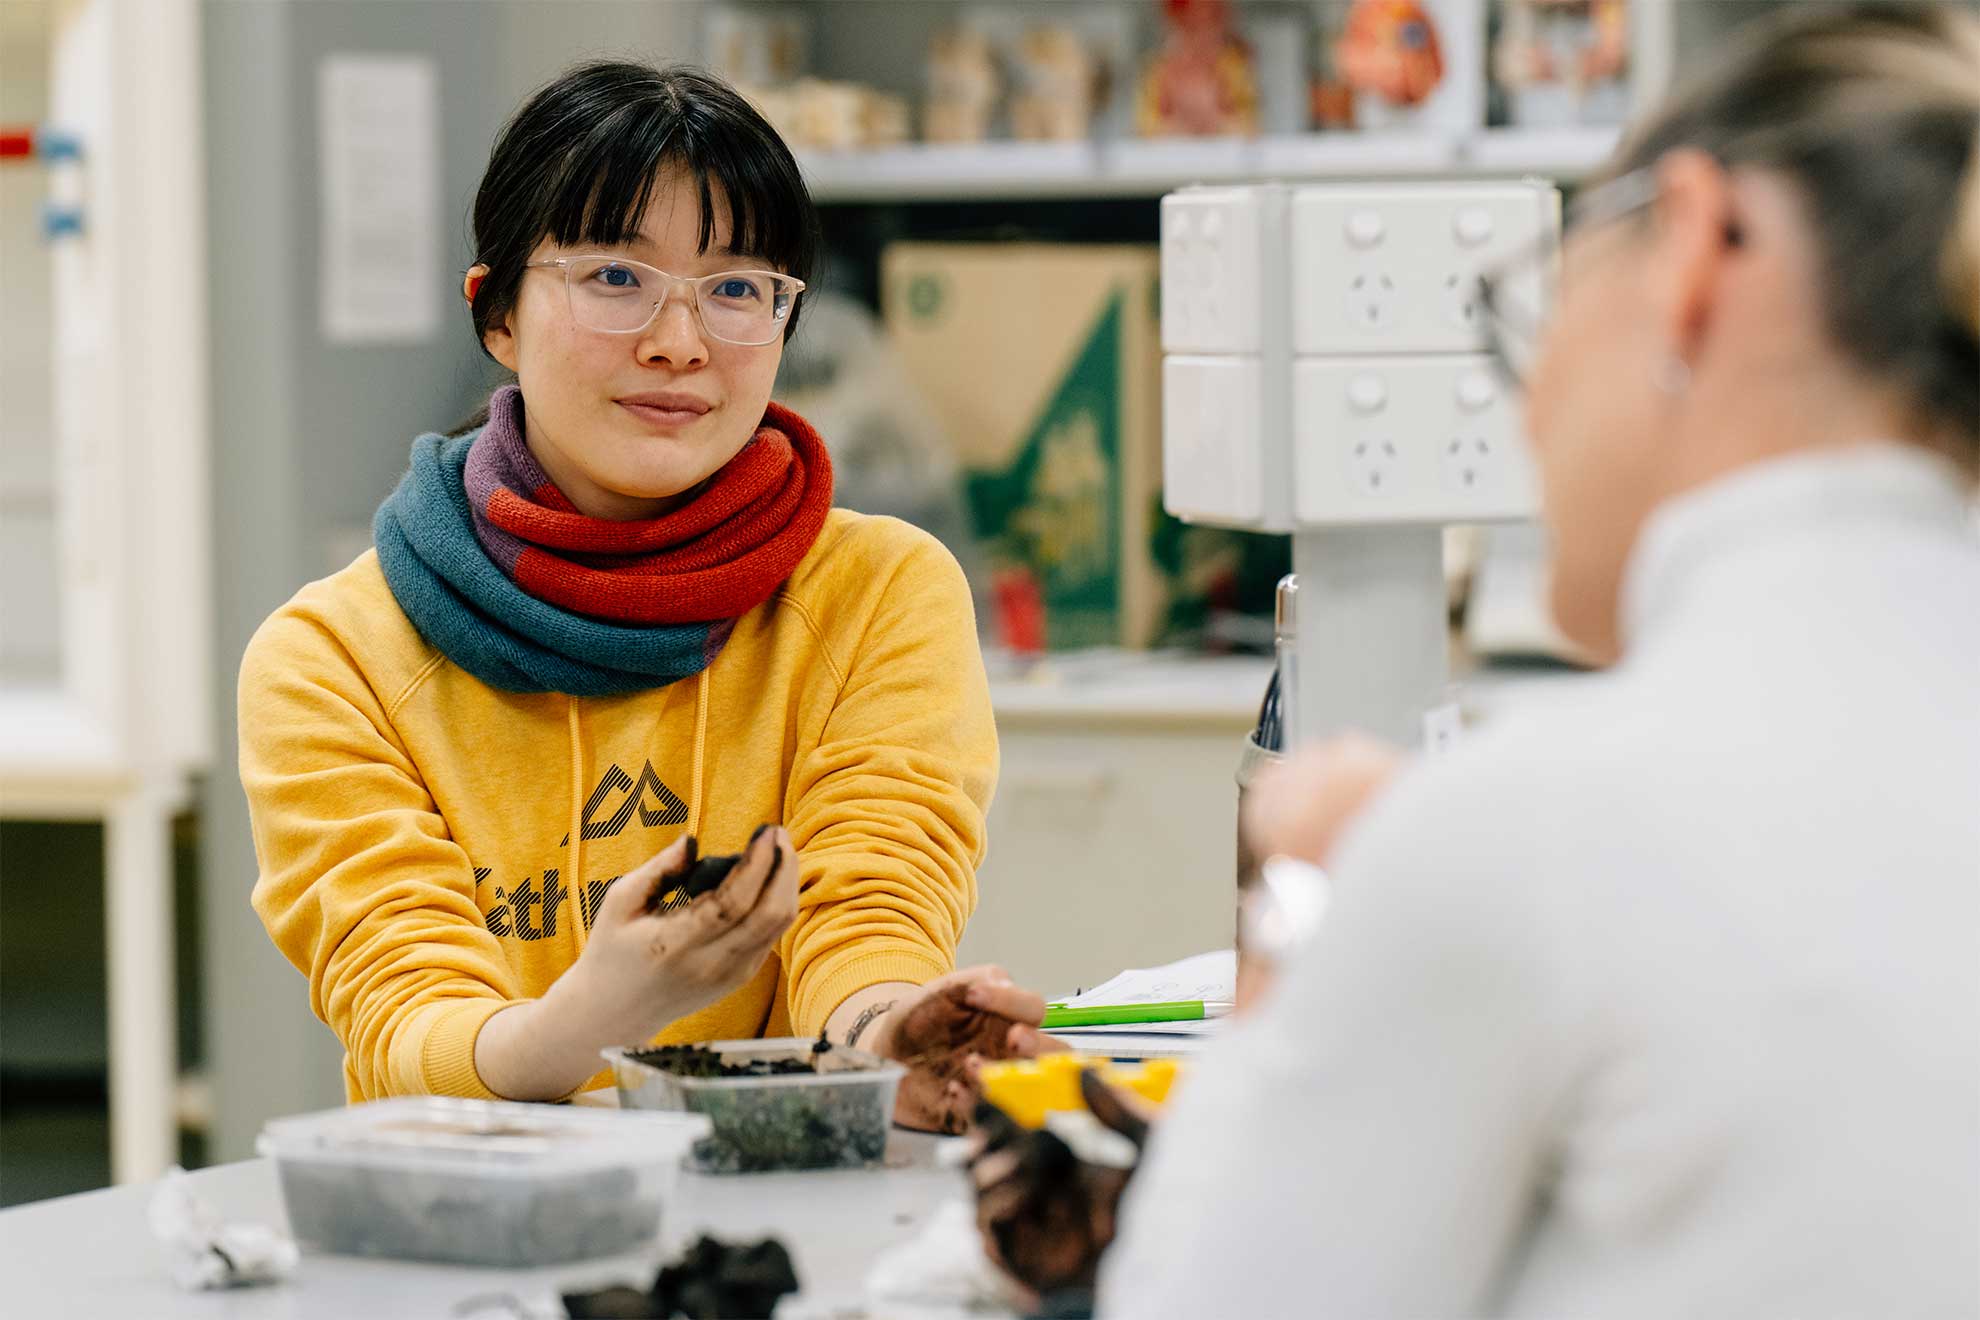 Postgraduate student Haruhi Wabiko moved from Japan to study her Bachelor of Marine Science with Honours at the University of Tasmania and is now studying her Graduate Diploma of Environmental Health here as well.